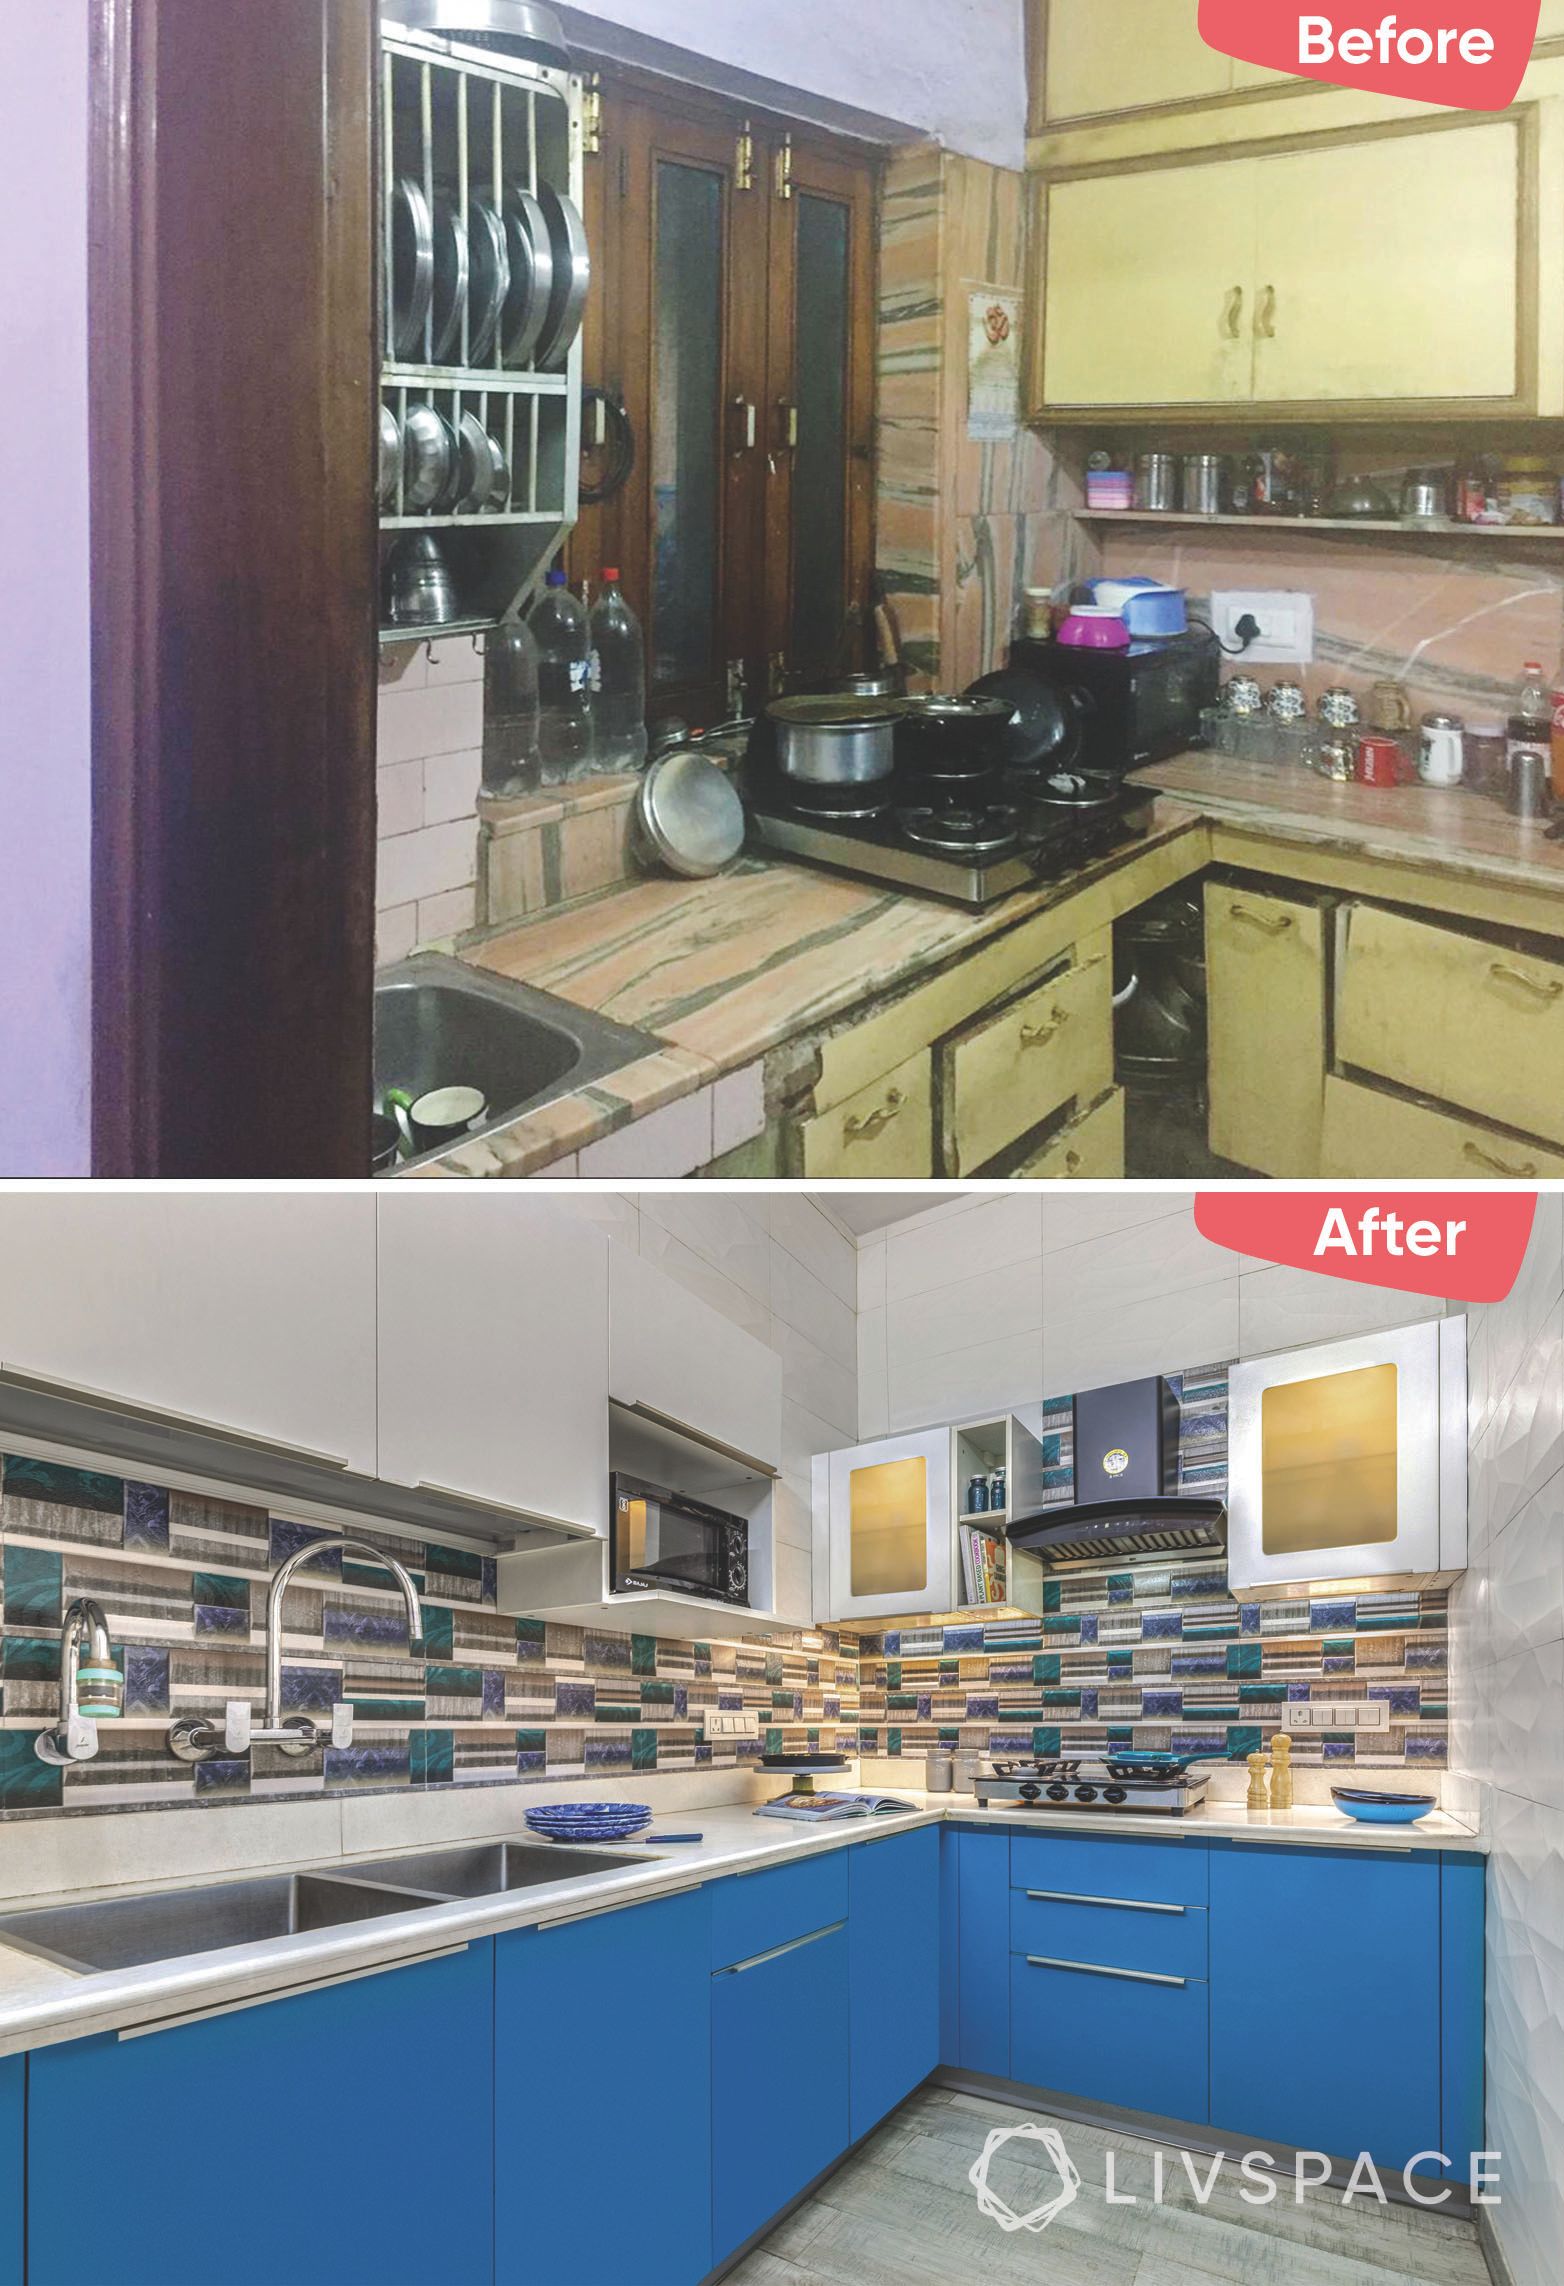 small-kitchen-interior-before-after-wooden-blue-white-cabinets-quartz-countertop-grey-flooring
﻿